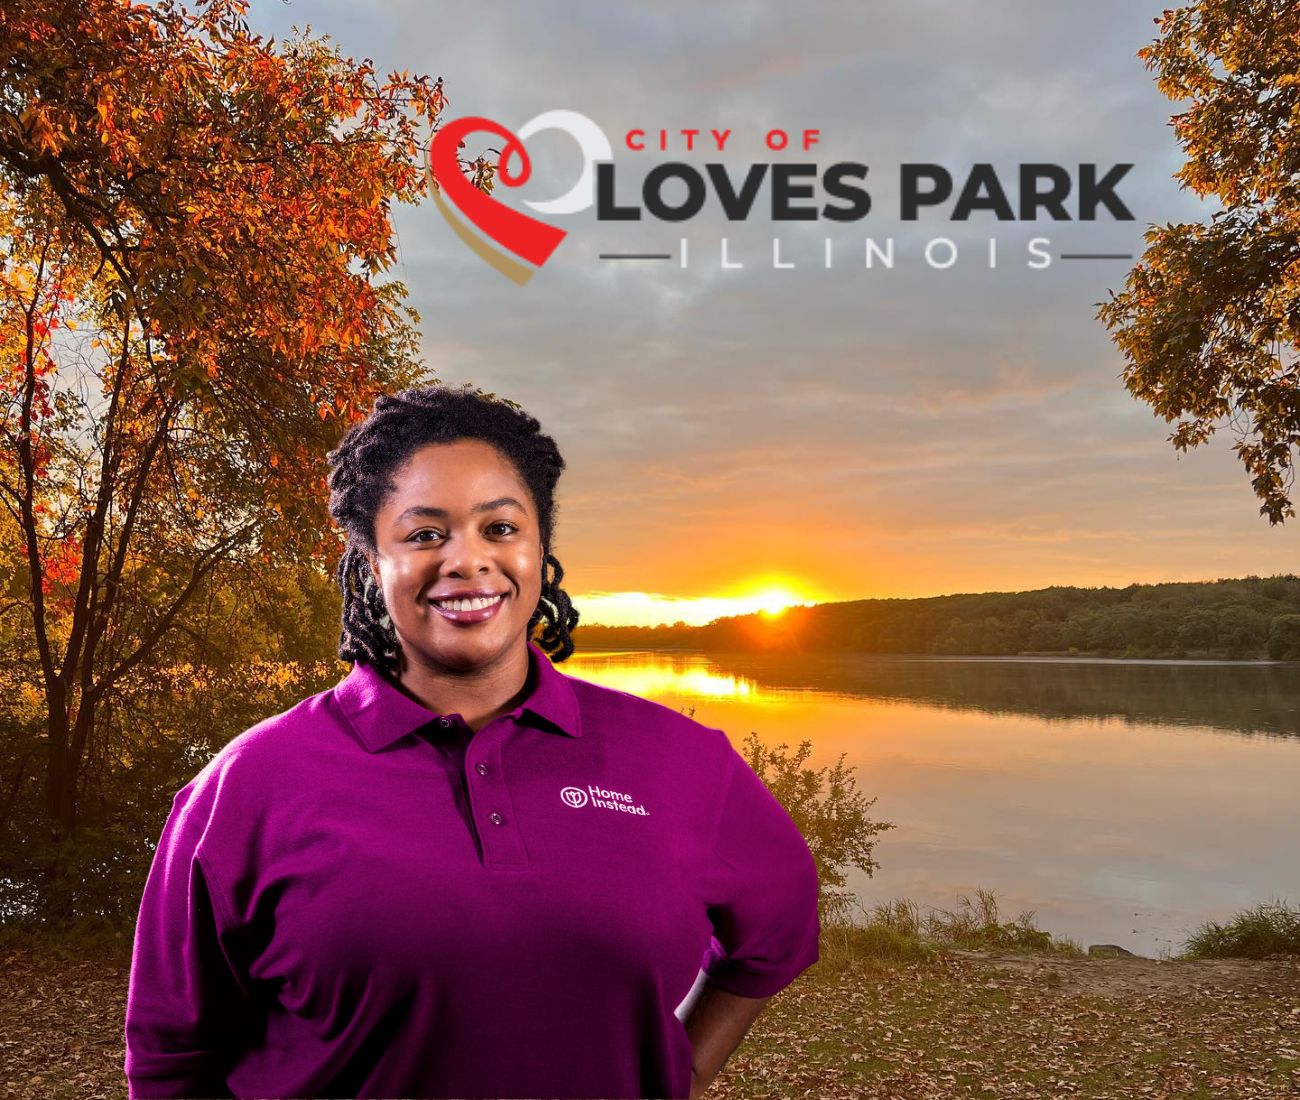 Home Instead caregiver with Loves Park Illinois in the background